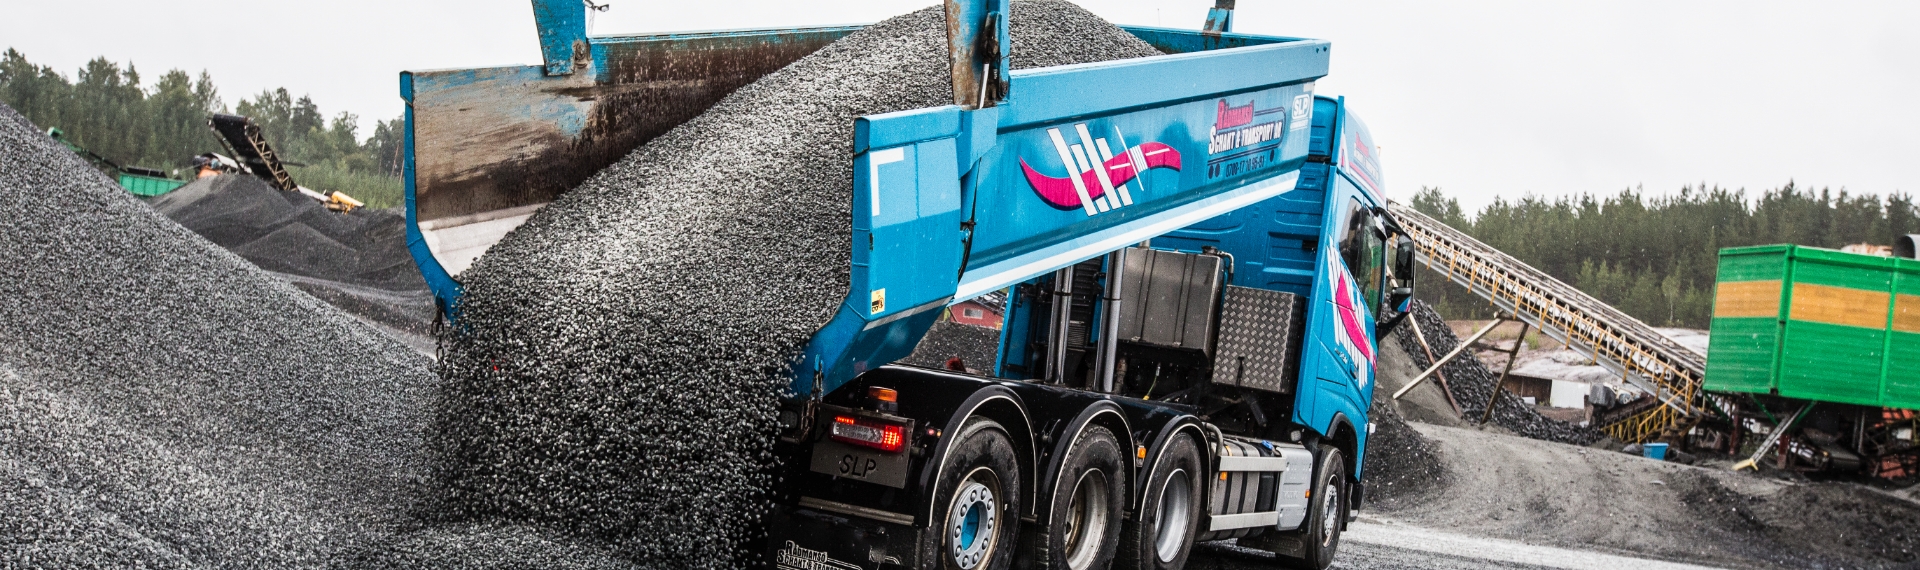 A dumptruck with body made in Hardox® 500 Tuf, offloading tons of abrasive rocks.